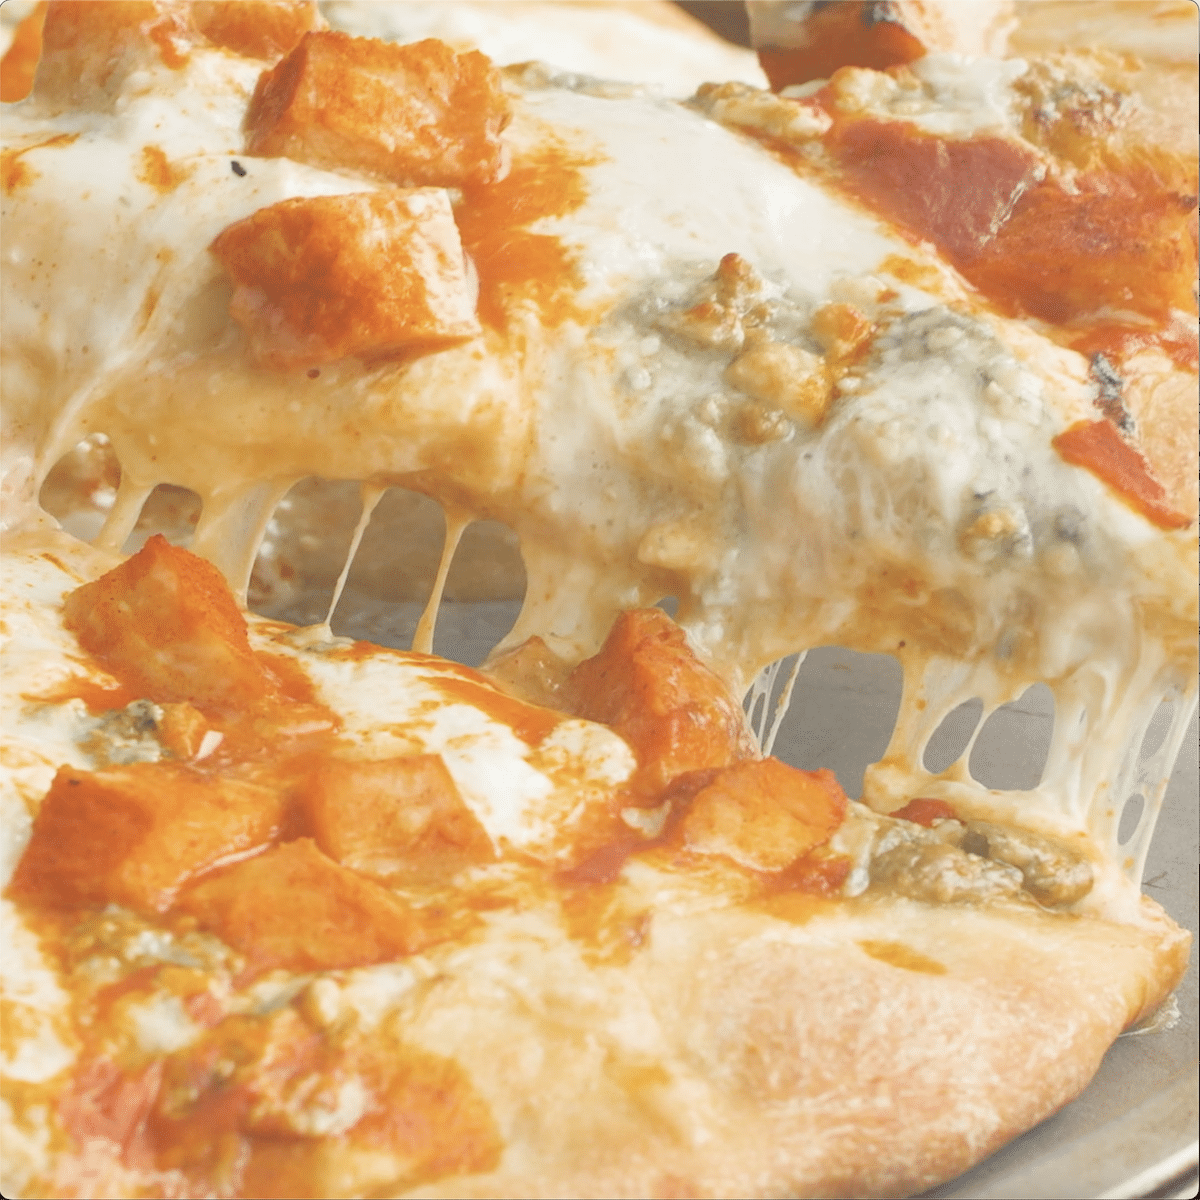 Up close view: Slice of buffalo chicken pizza being lifted from the other slices.